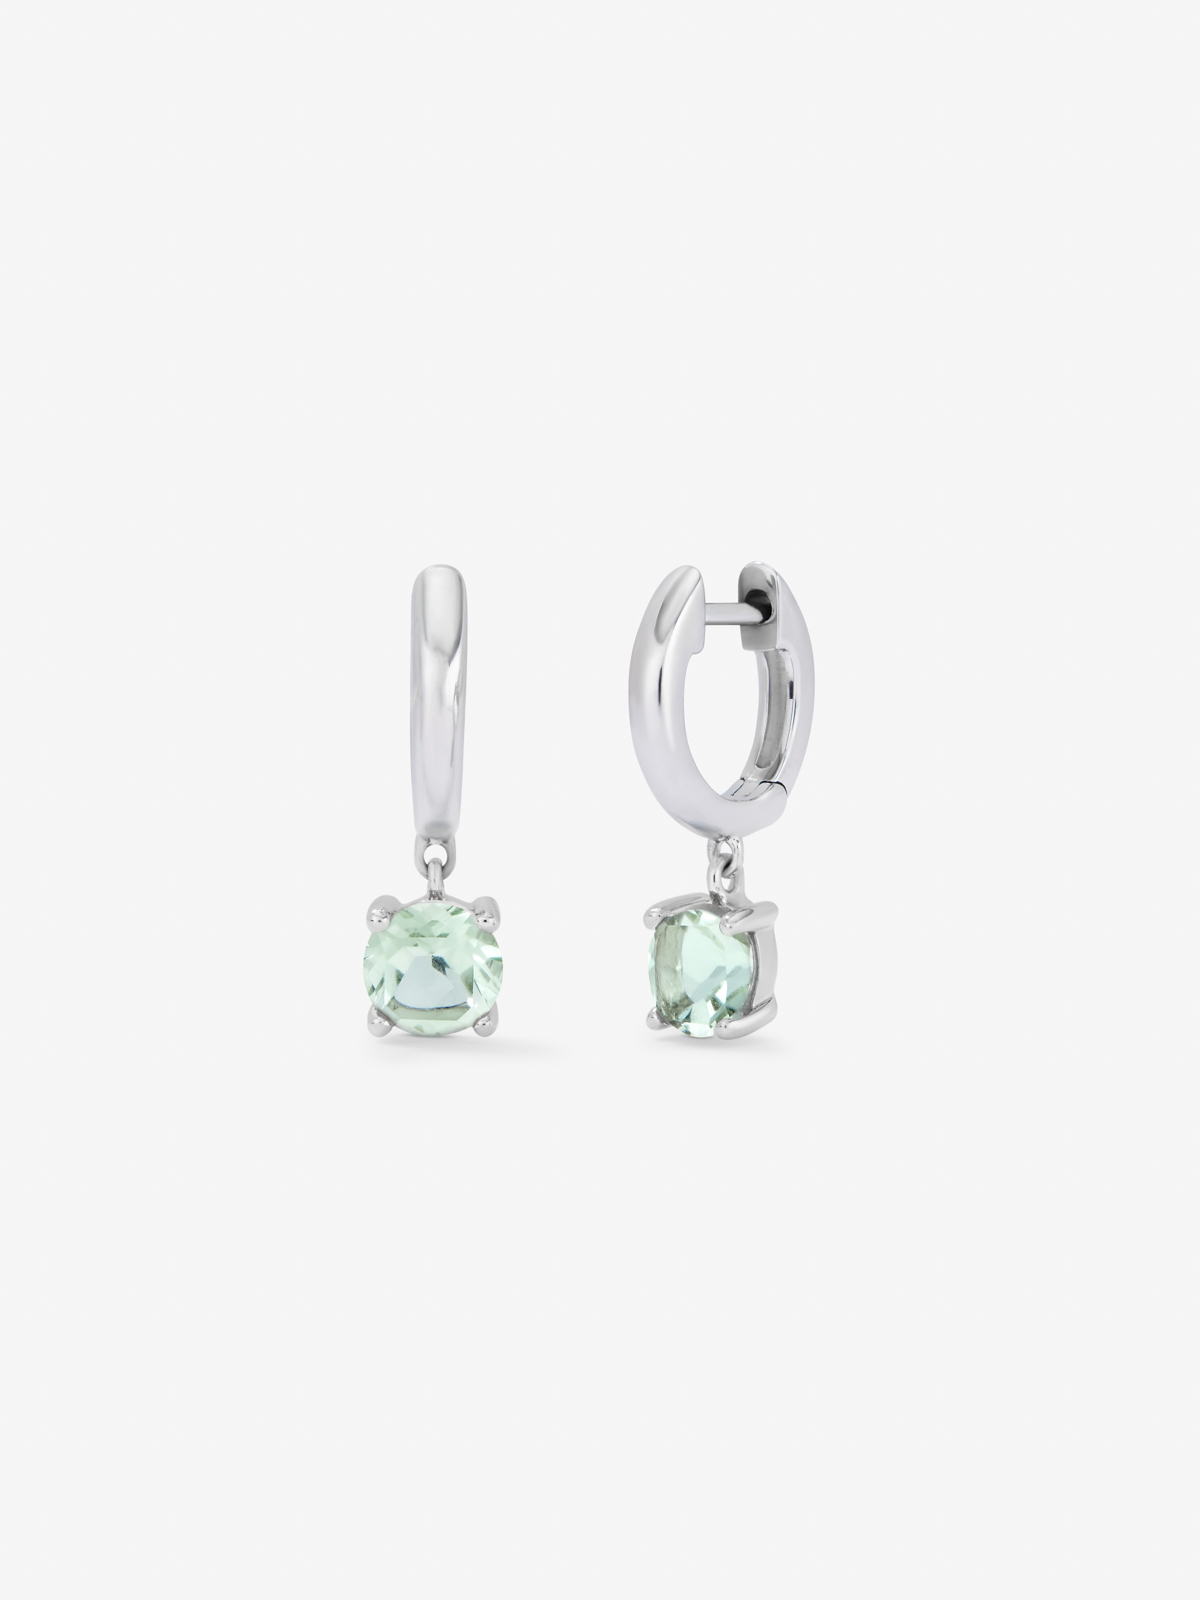 925 silver earrings with green ameterists in 1.2 cts bright size